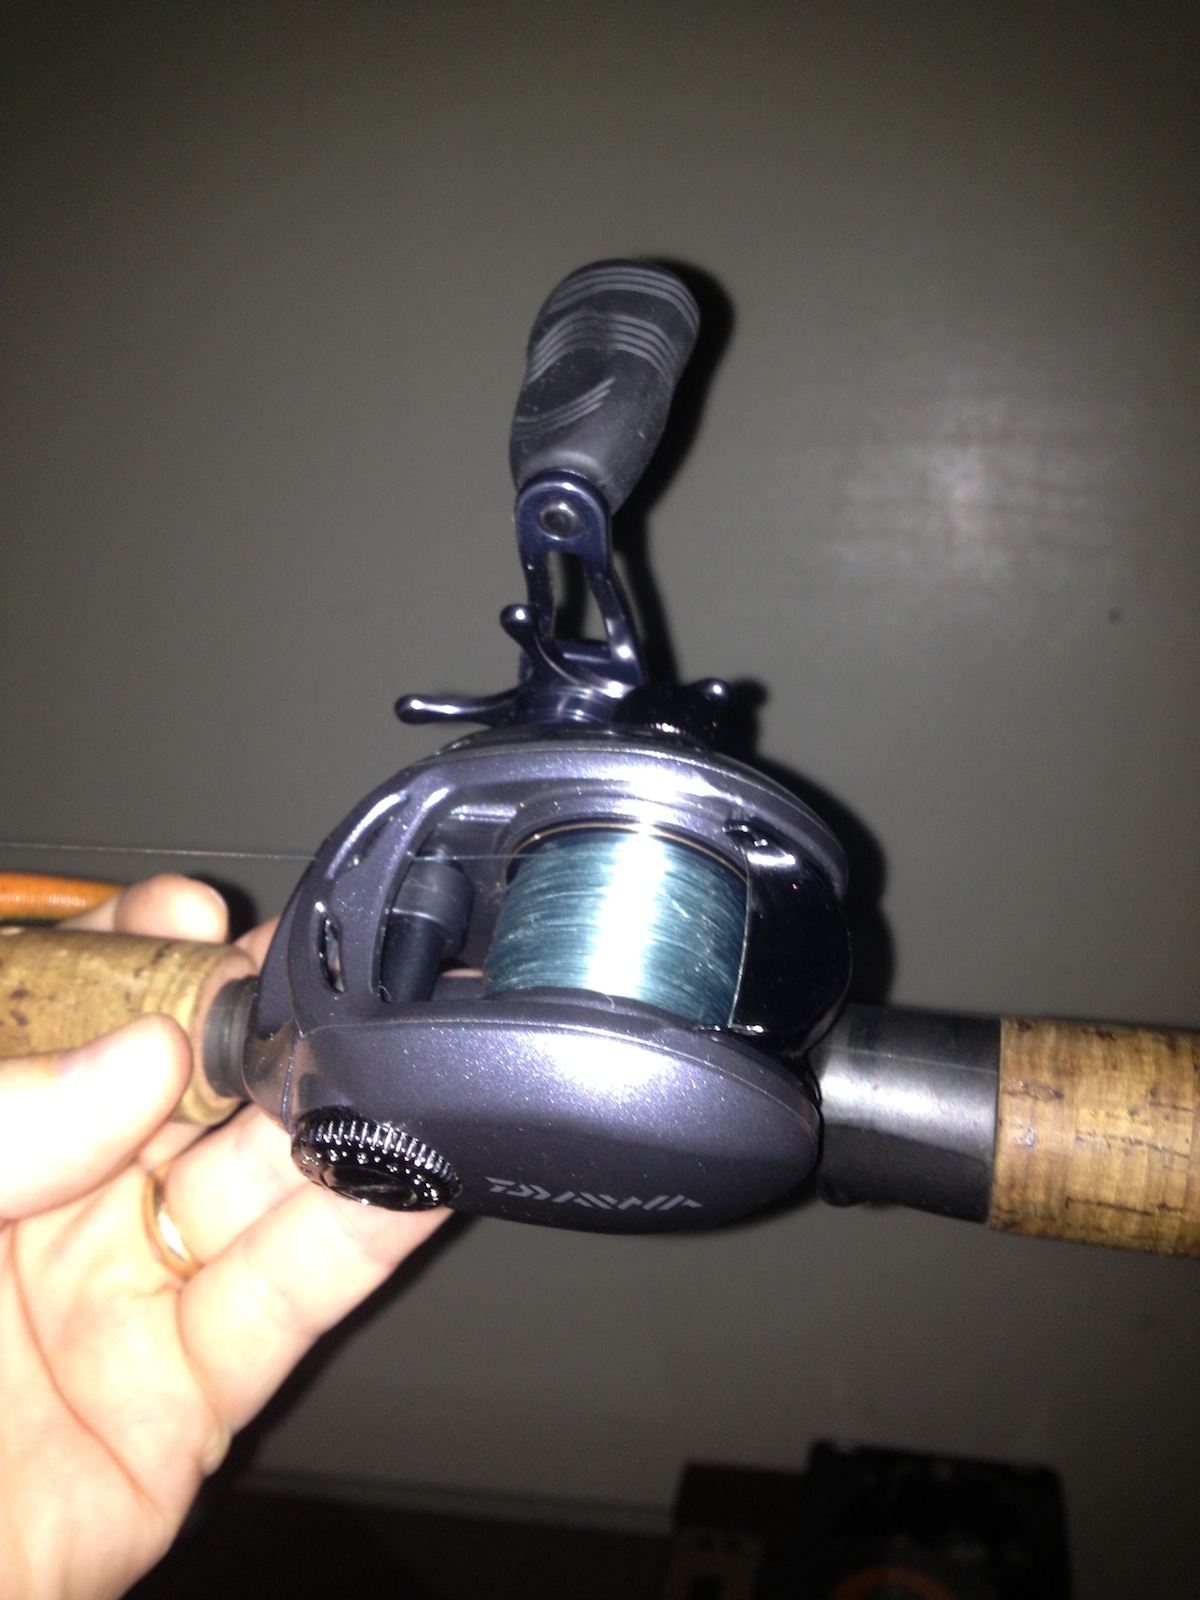 Daiwa Lexa 100Hs First Thoughts. - Fishing Rods, Reels, Line, and Knots  - Bass Fishing Forums